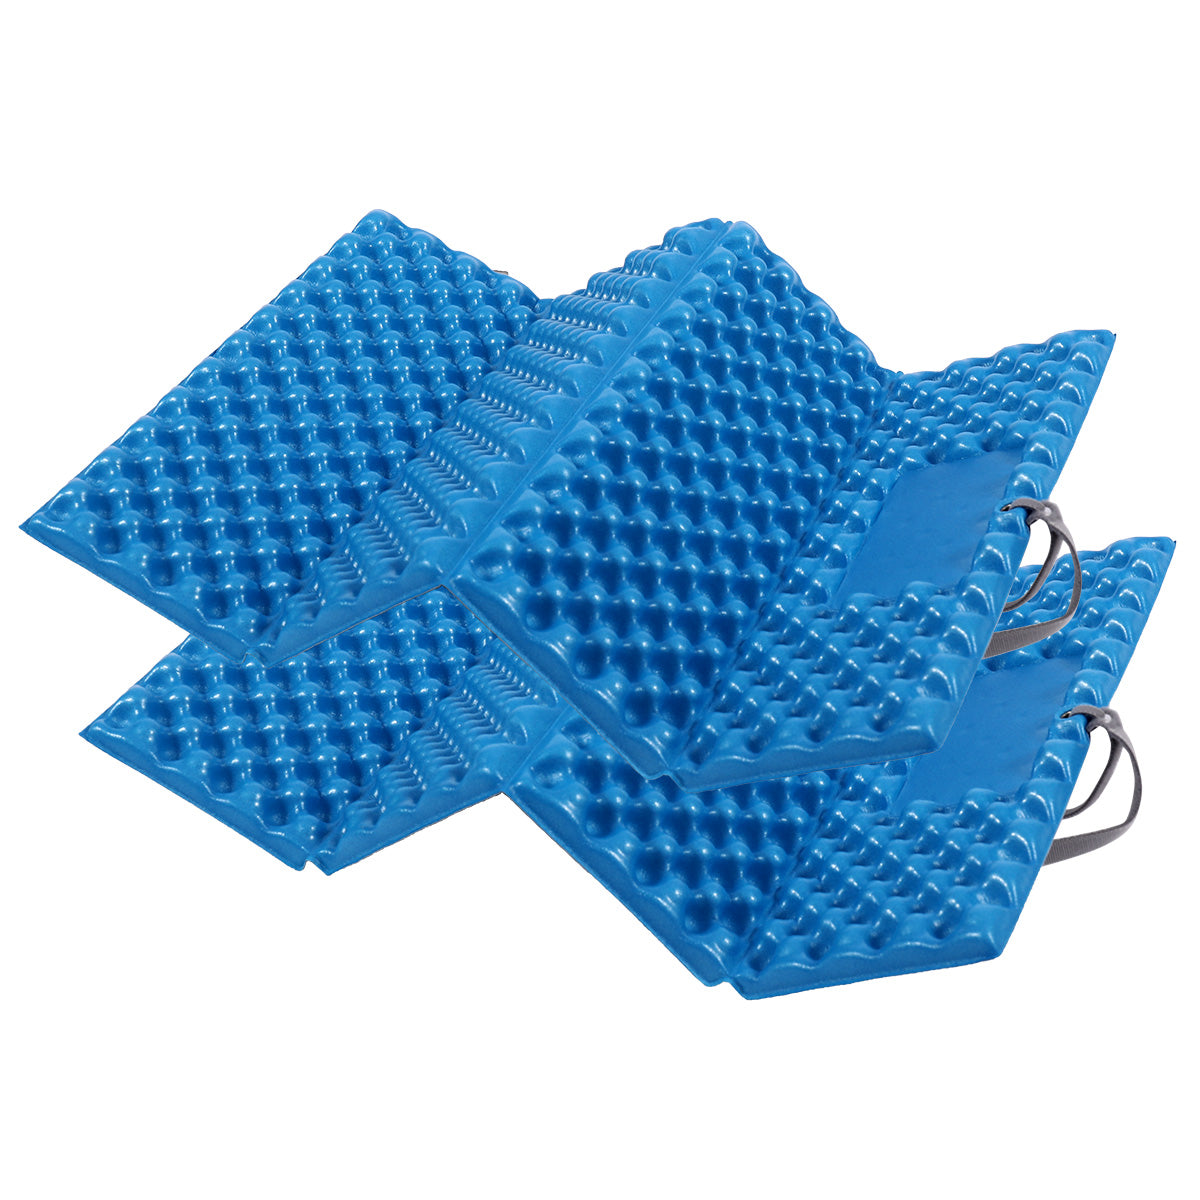 AceCamp 3940 Portable Lightweight Mini Waterproof Folding Mat, Foam Sitting  Pad for Outdoor Activities, Foldable Kneeling and Seat Cushion for